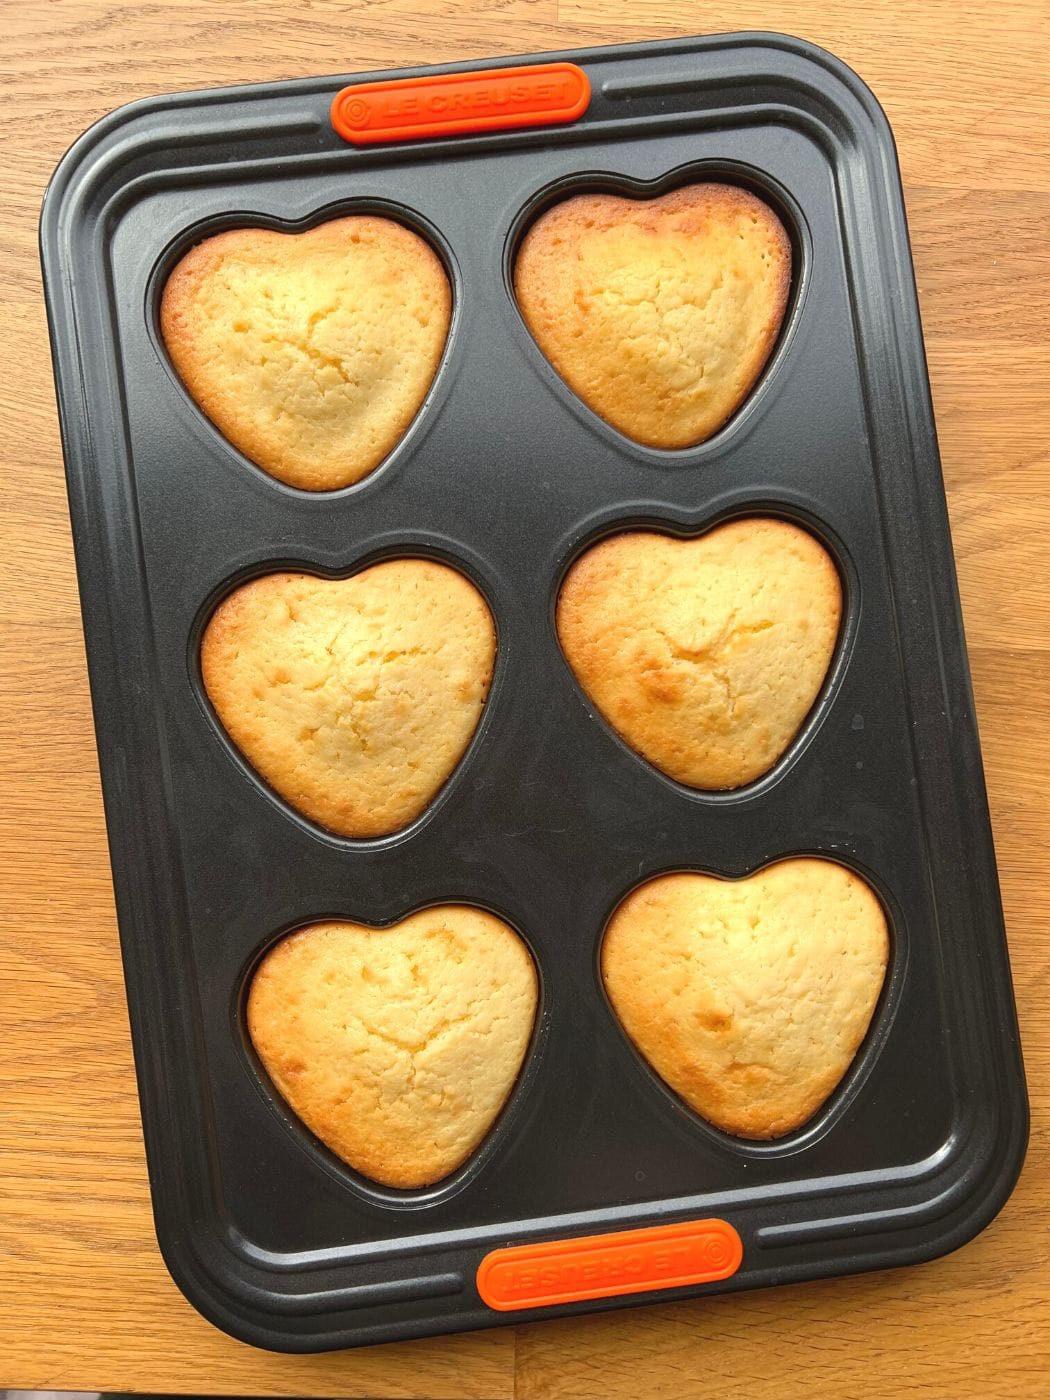 Golden freshly baked mini cakes cooling in the baking tray.